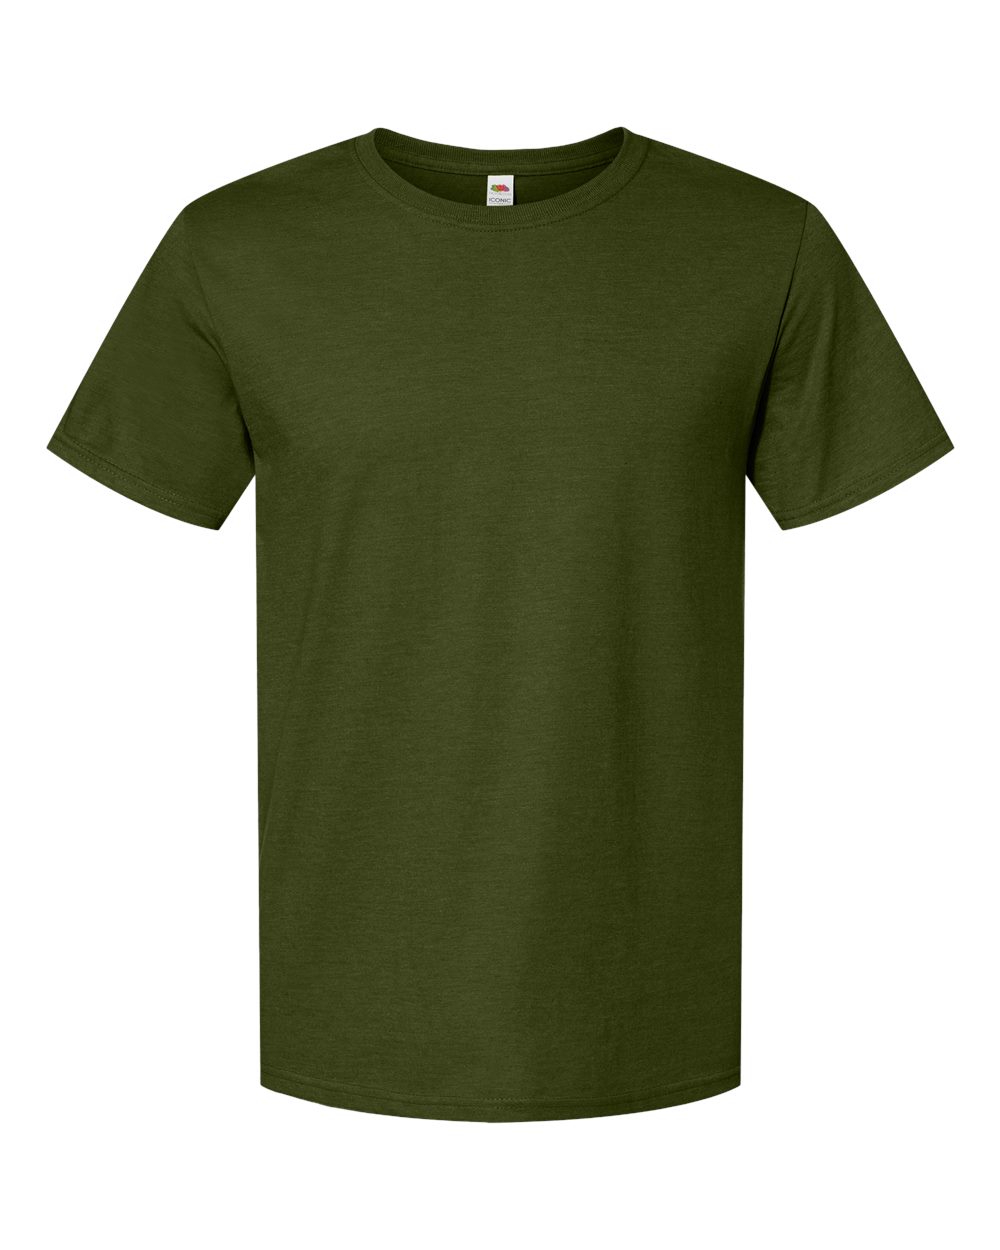 click to view Military Green Heather